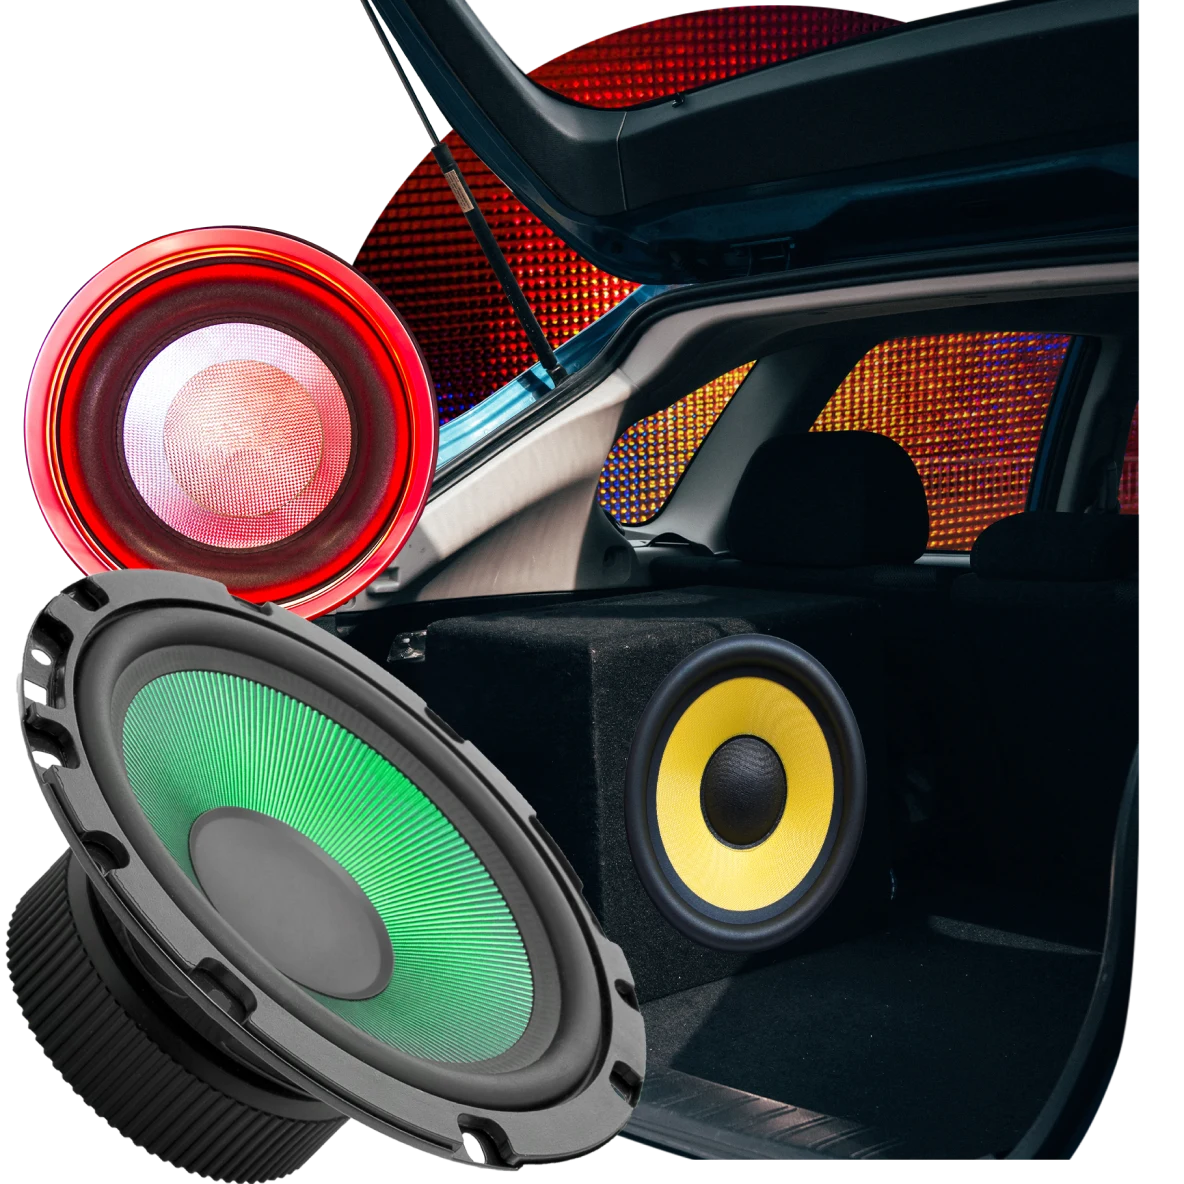 Collage of car sound system parts. Speakers in red, yellow, black and green. An open car hatchback against a large headlight.